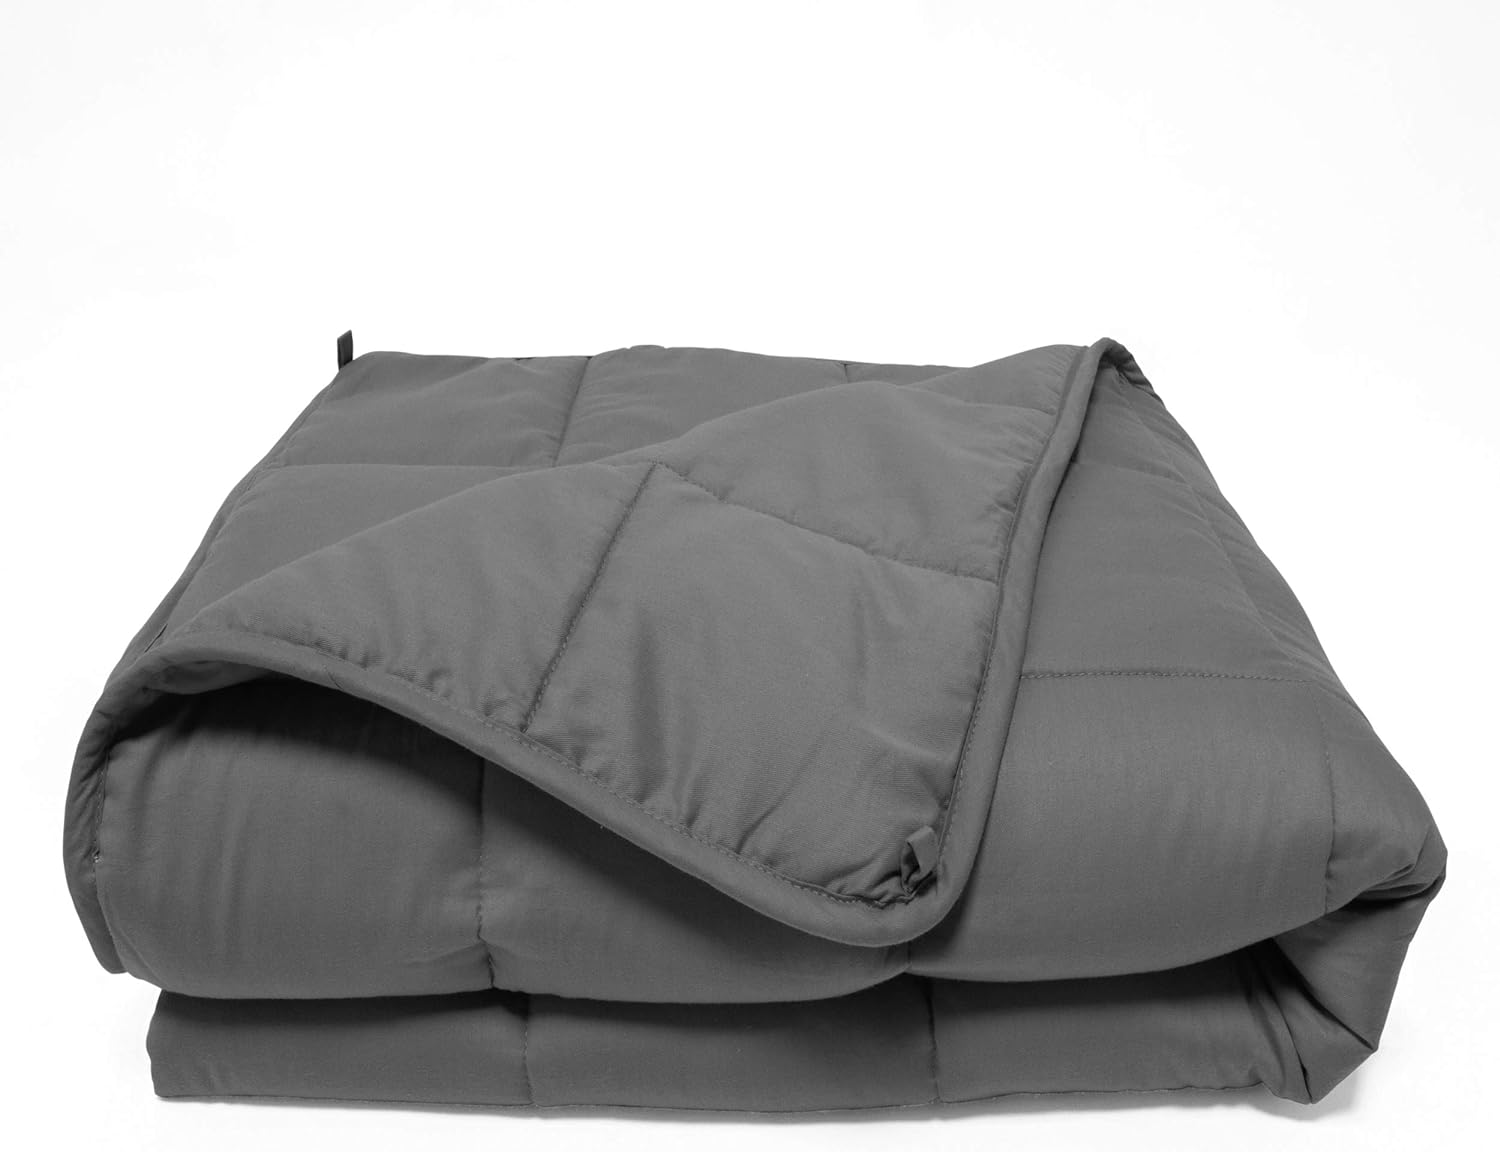 improve sleep Benefits of a Weighted Blanket, deep touch pressure, fall asleep, parasympathetic nervous system, good night's sleep, best weighted blanket 